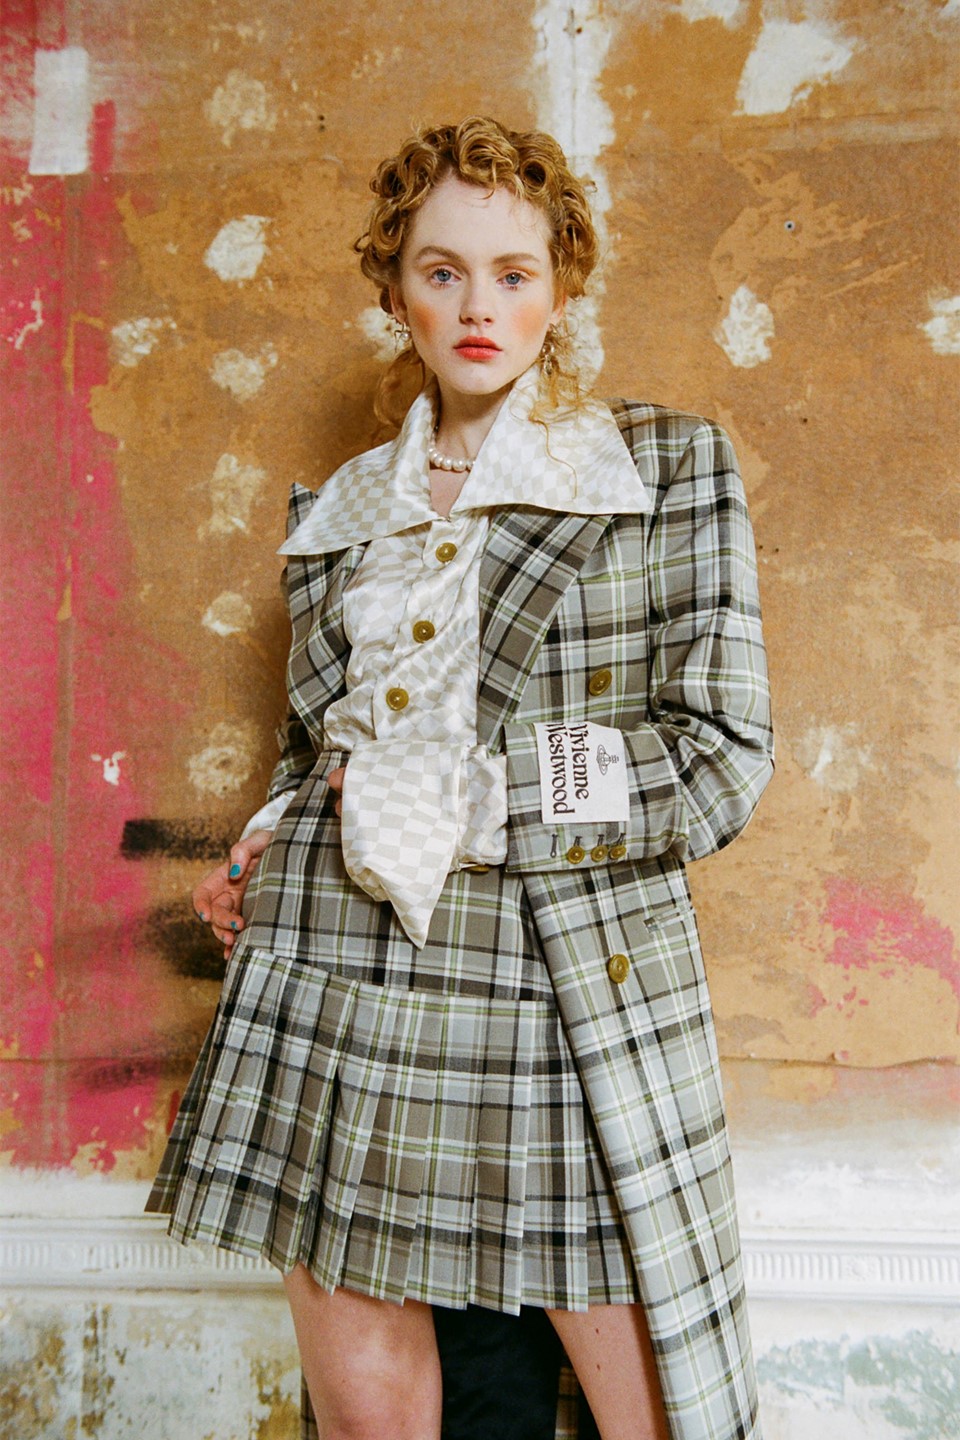 From Punk to Couture: Vivienne Westwood's Impact on Fashion – AmberSun